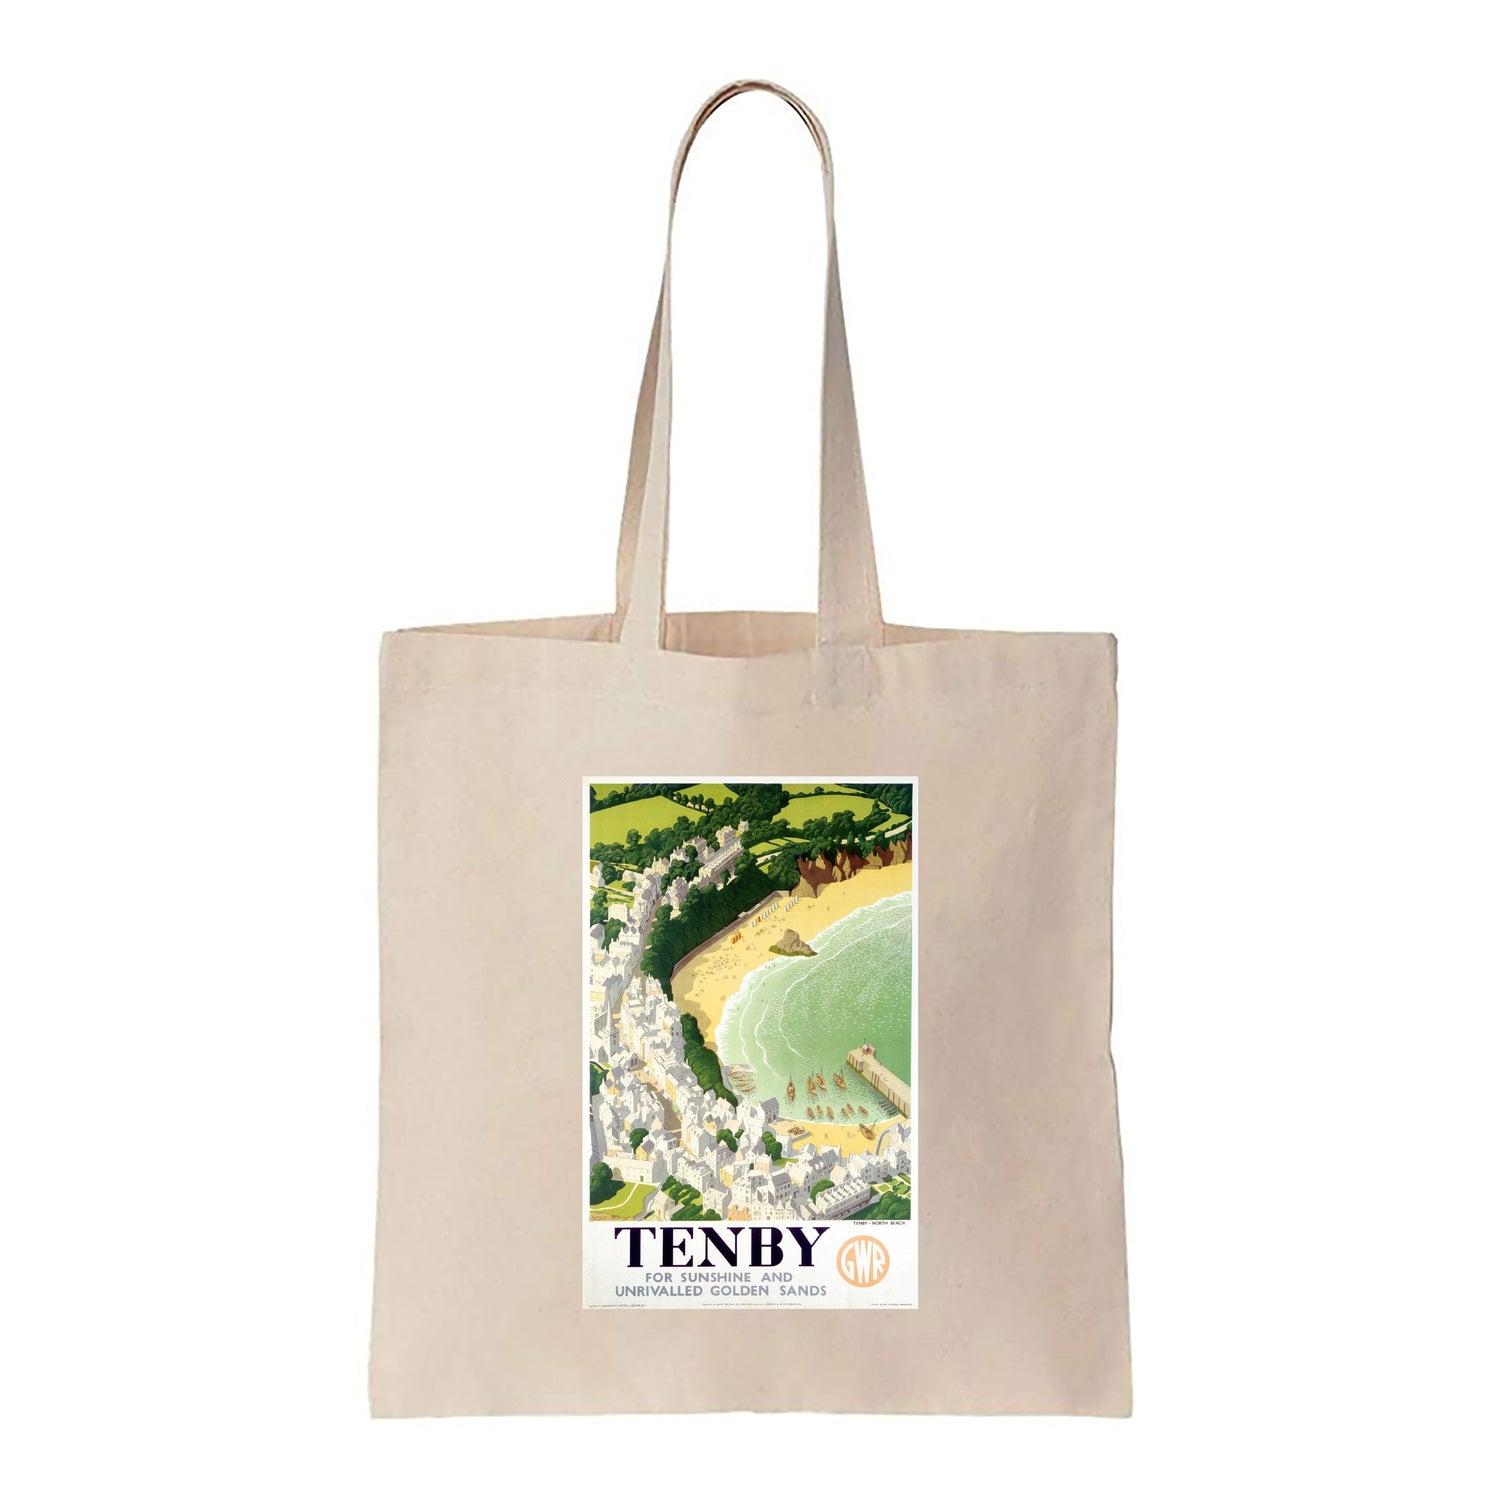 Tenby, for Sunshire - Canvas Tote Bag